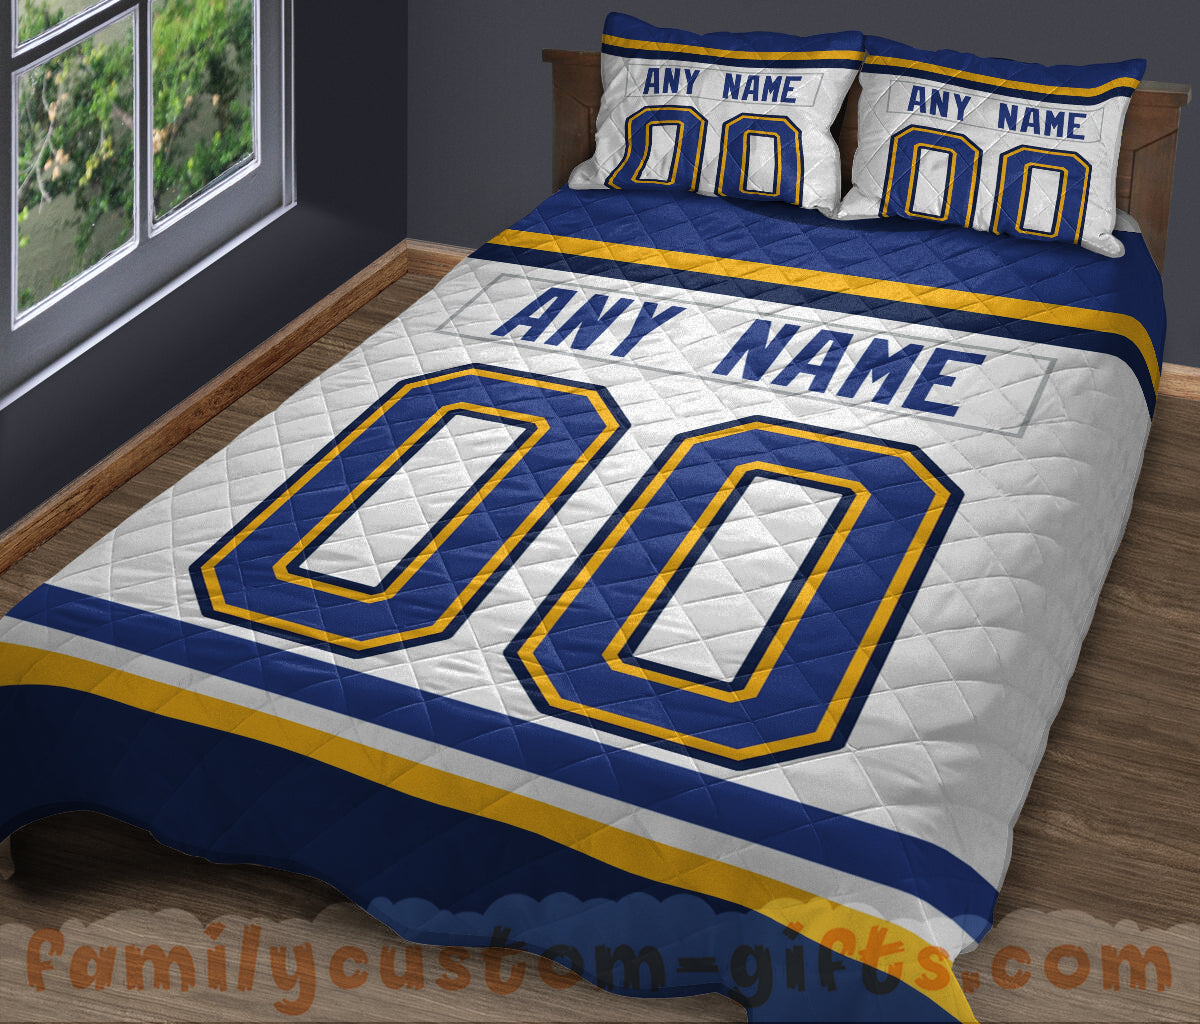 Custom Quilt Sets St. Louis Jersey Personalized Ice hockey Premium Quilt Bedding for Men Women